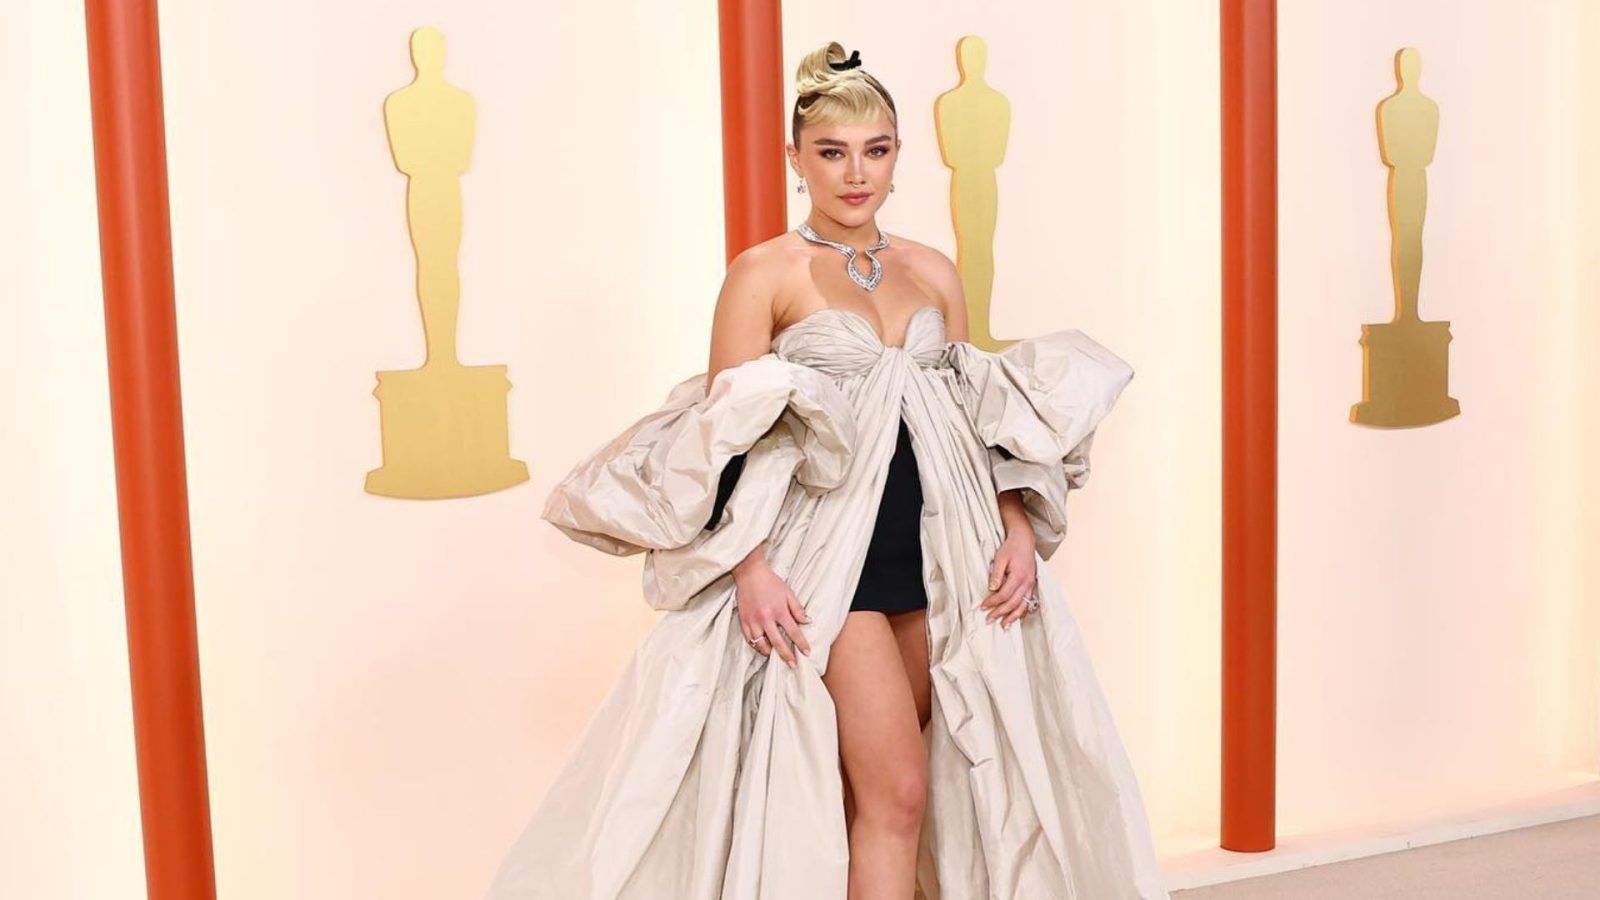 Florence Pugh Net worth, career and other interesting facts